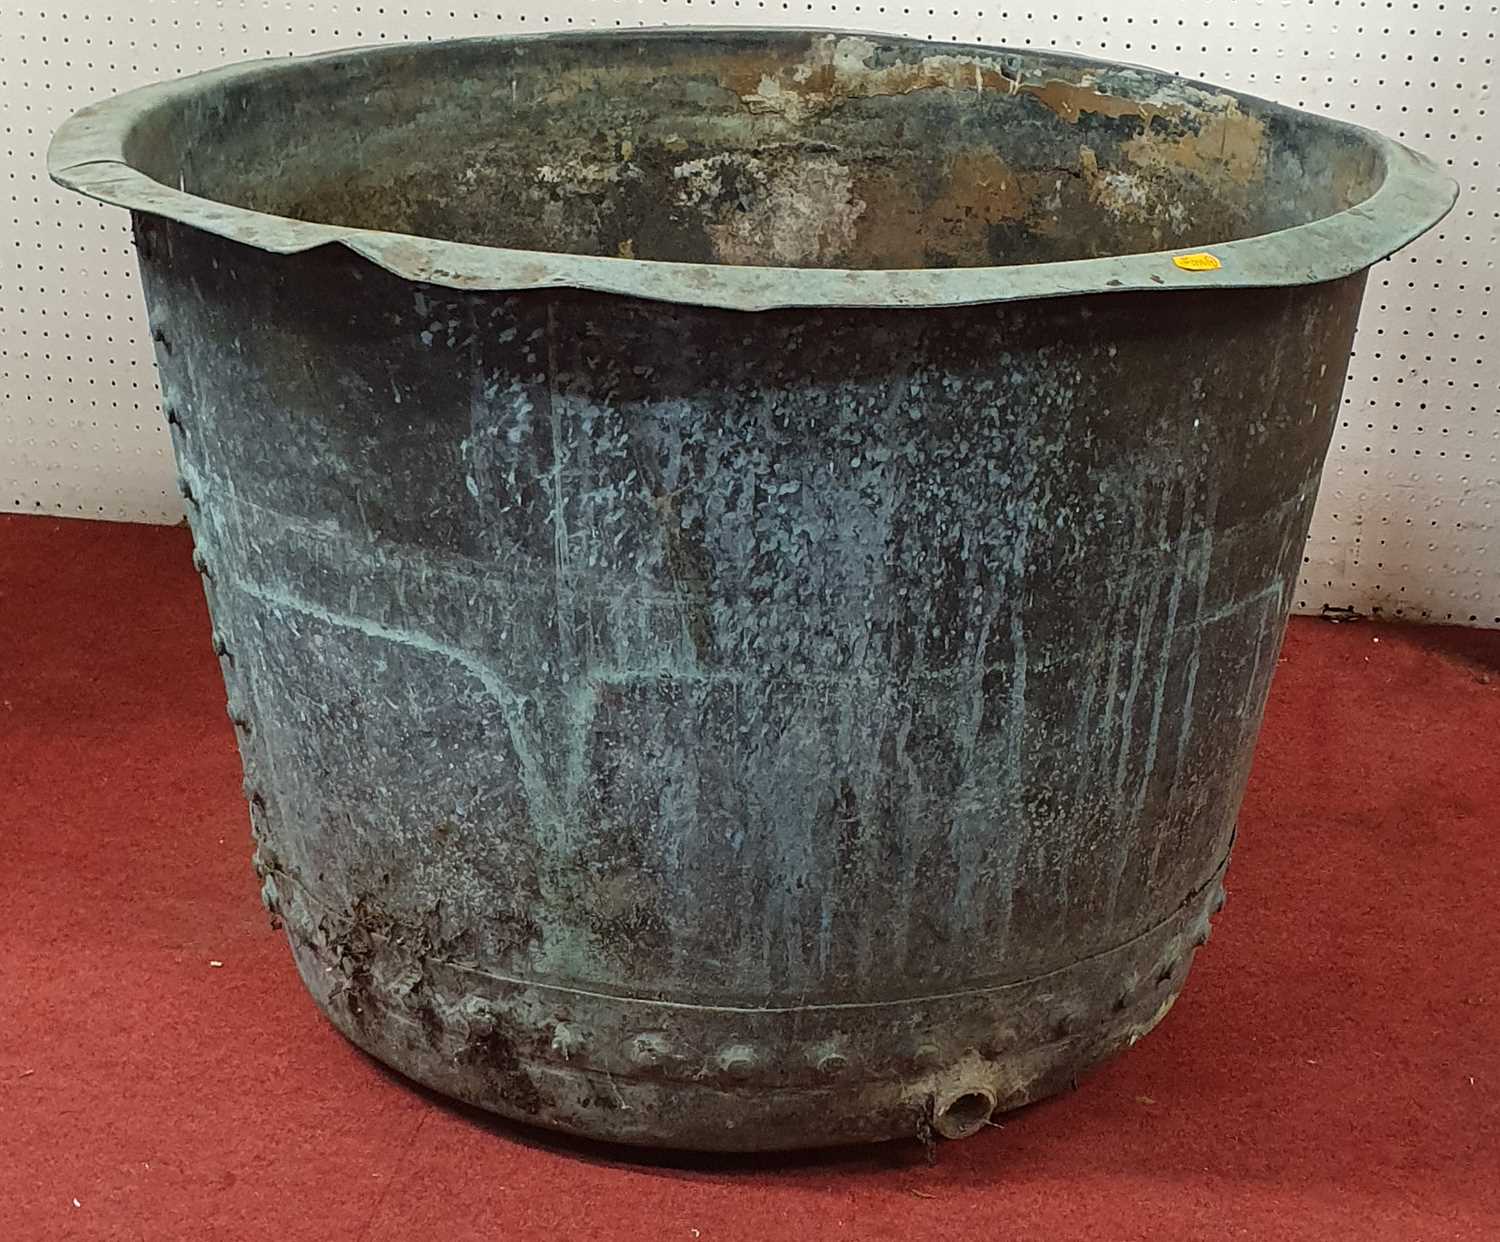 A circa 1900 large copper log bucket of circular form with riveted construction, verdigris patina, - Image 7 of 7